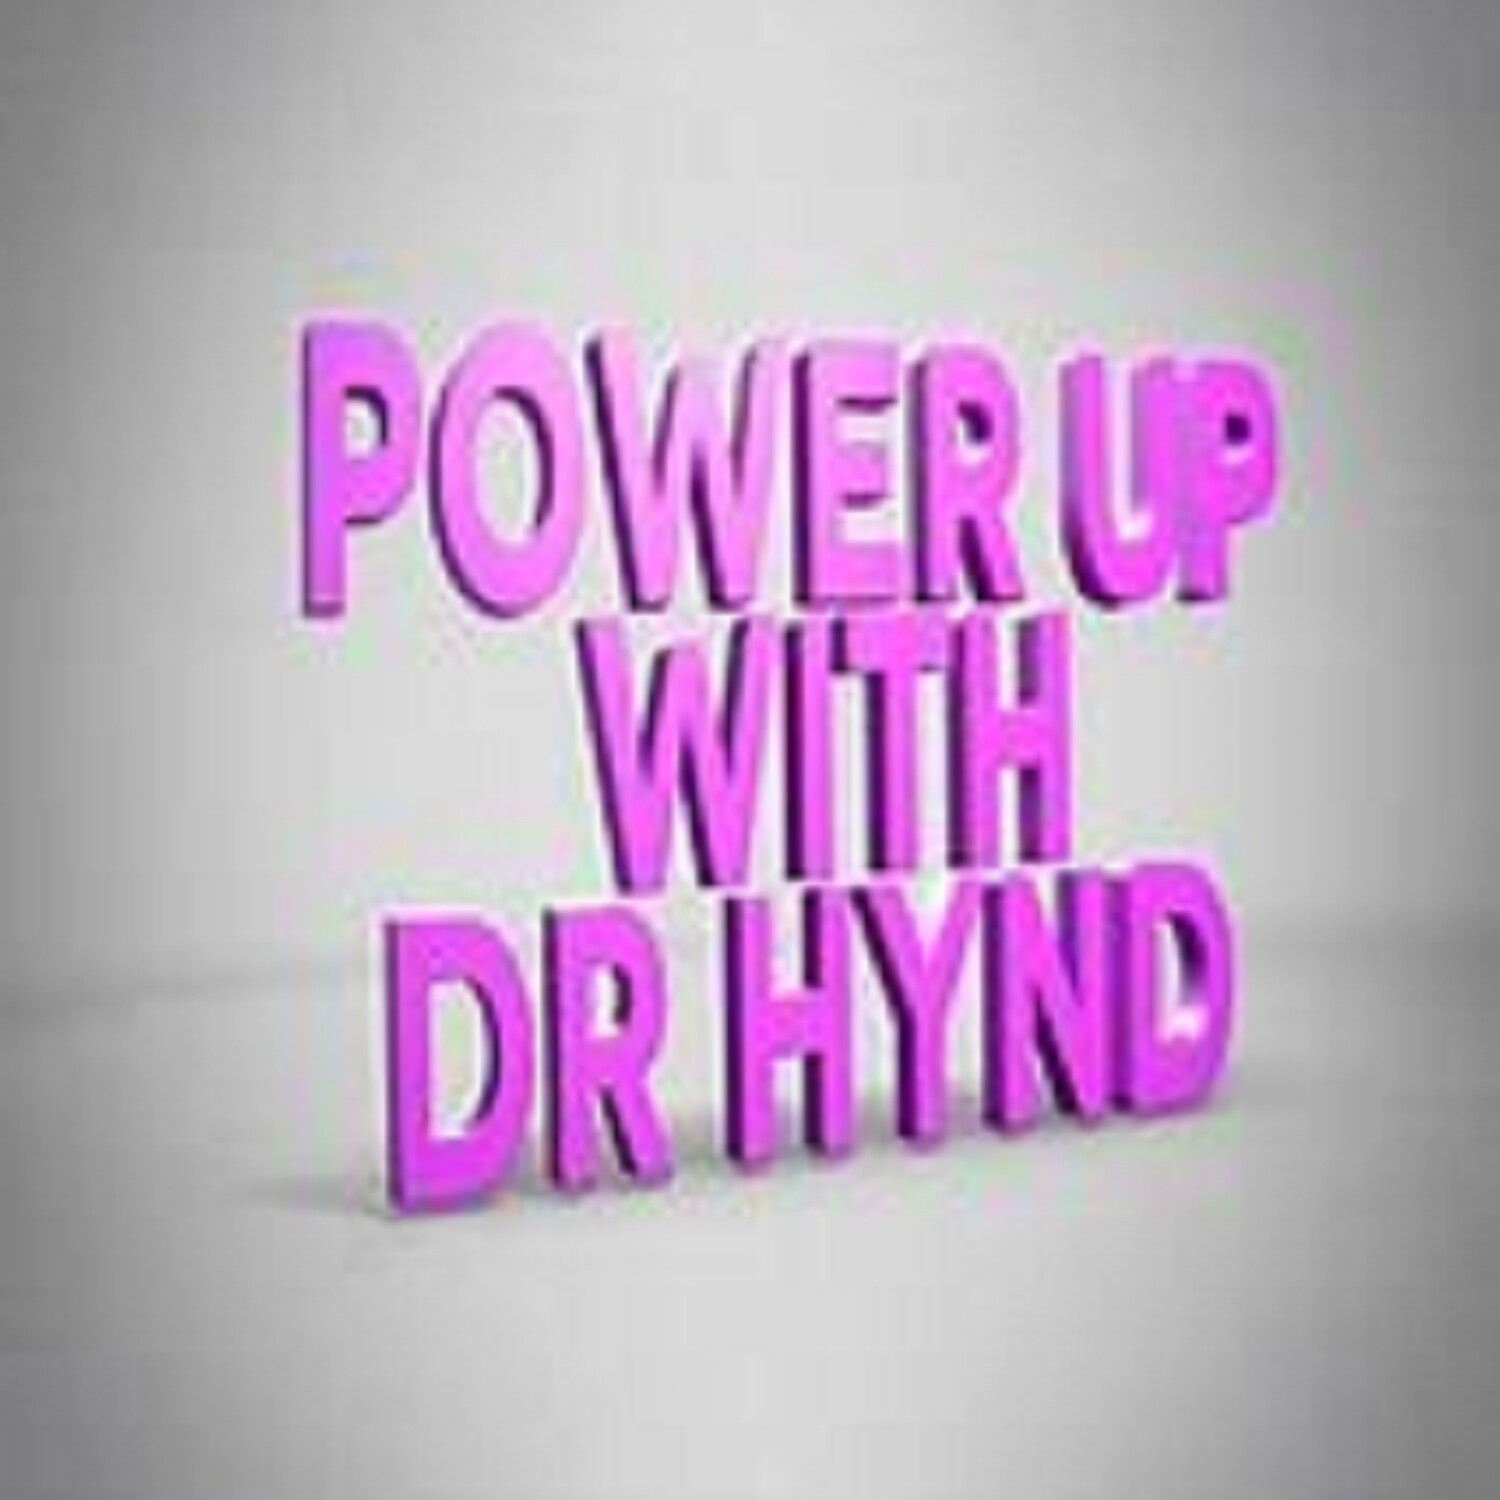 Women's Empowerment Series with Dr. Hynd and Valerie Sandjivy.